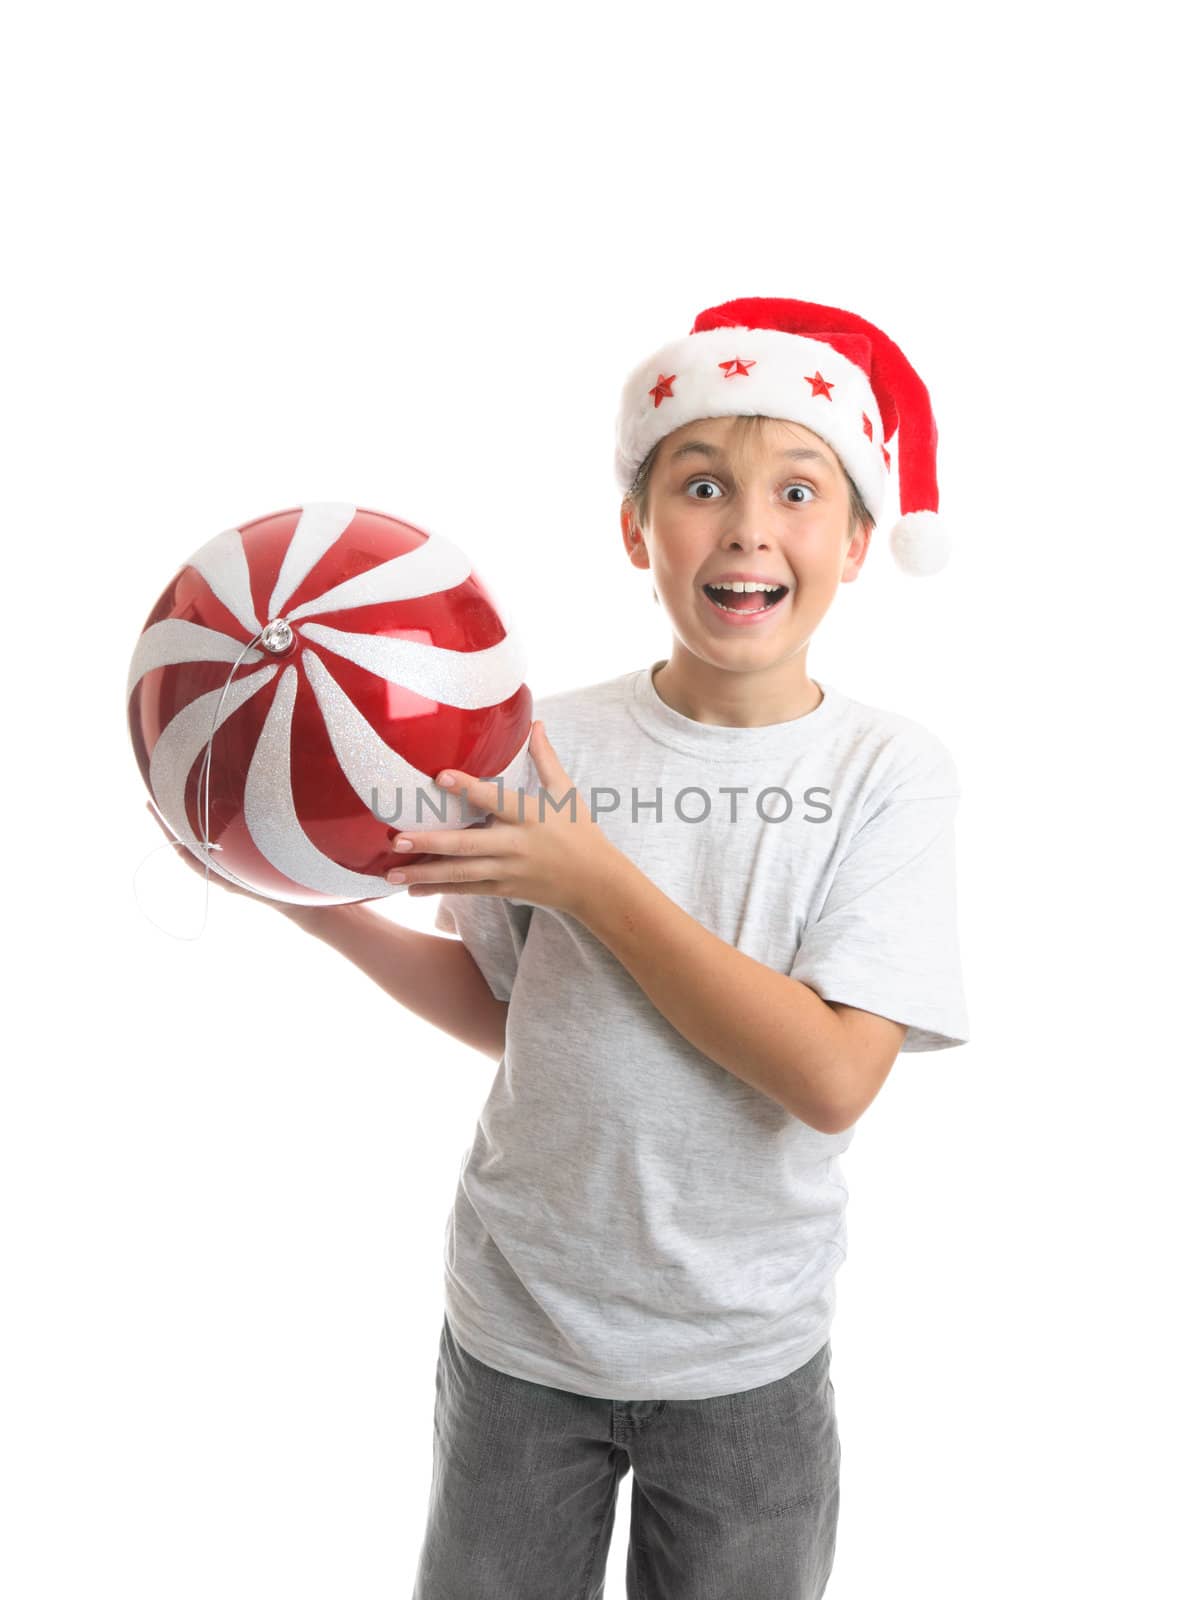 An excited ecstatic boy holding a big Christmas bauble ball decoration.  Red and white with sparkling glitter and a silver thread